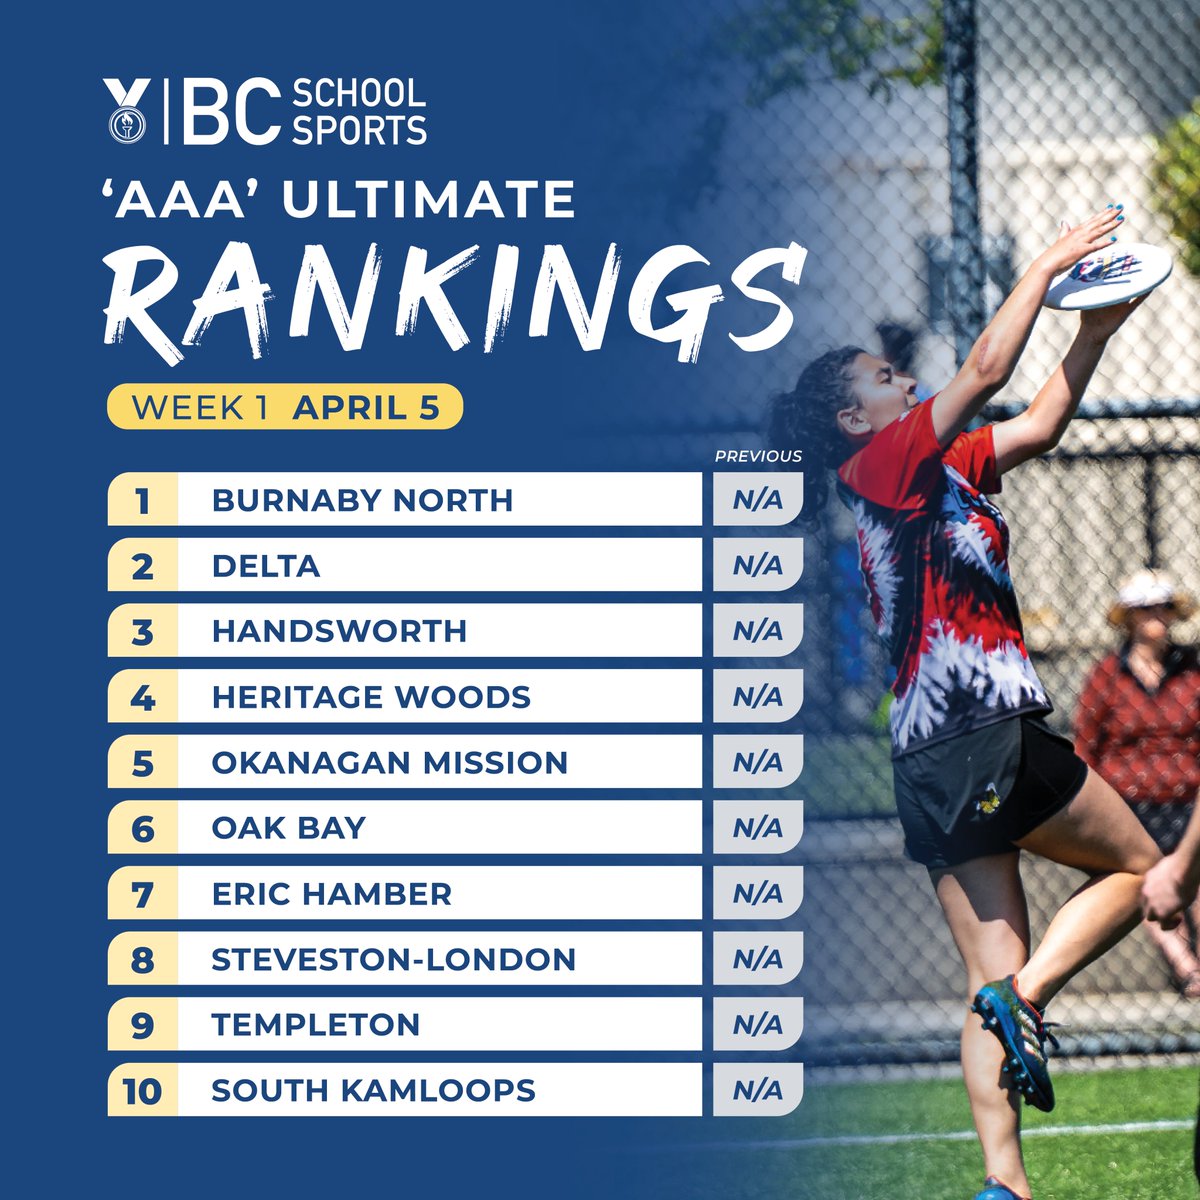 We are excited to introduce the first-ever set of 2A and 3A rankings for BCSS Ultimate. Stay tuned for weekly posts this season! #BCSSRankings